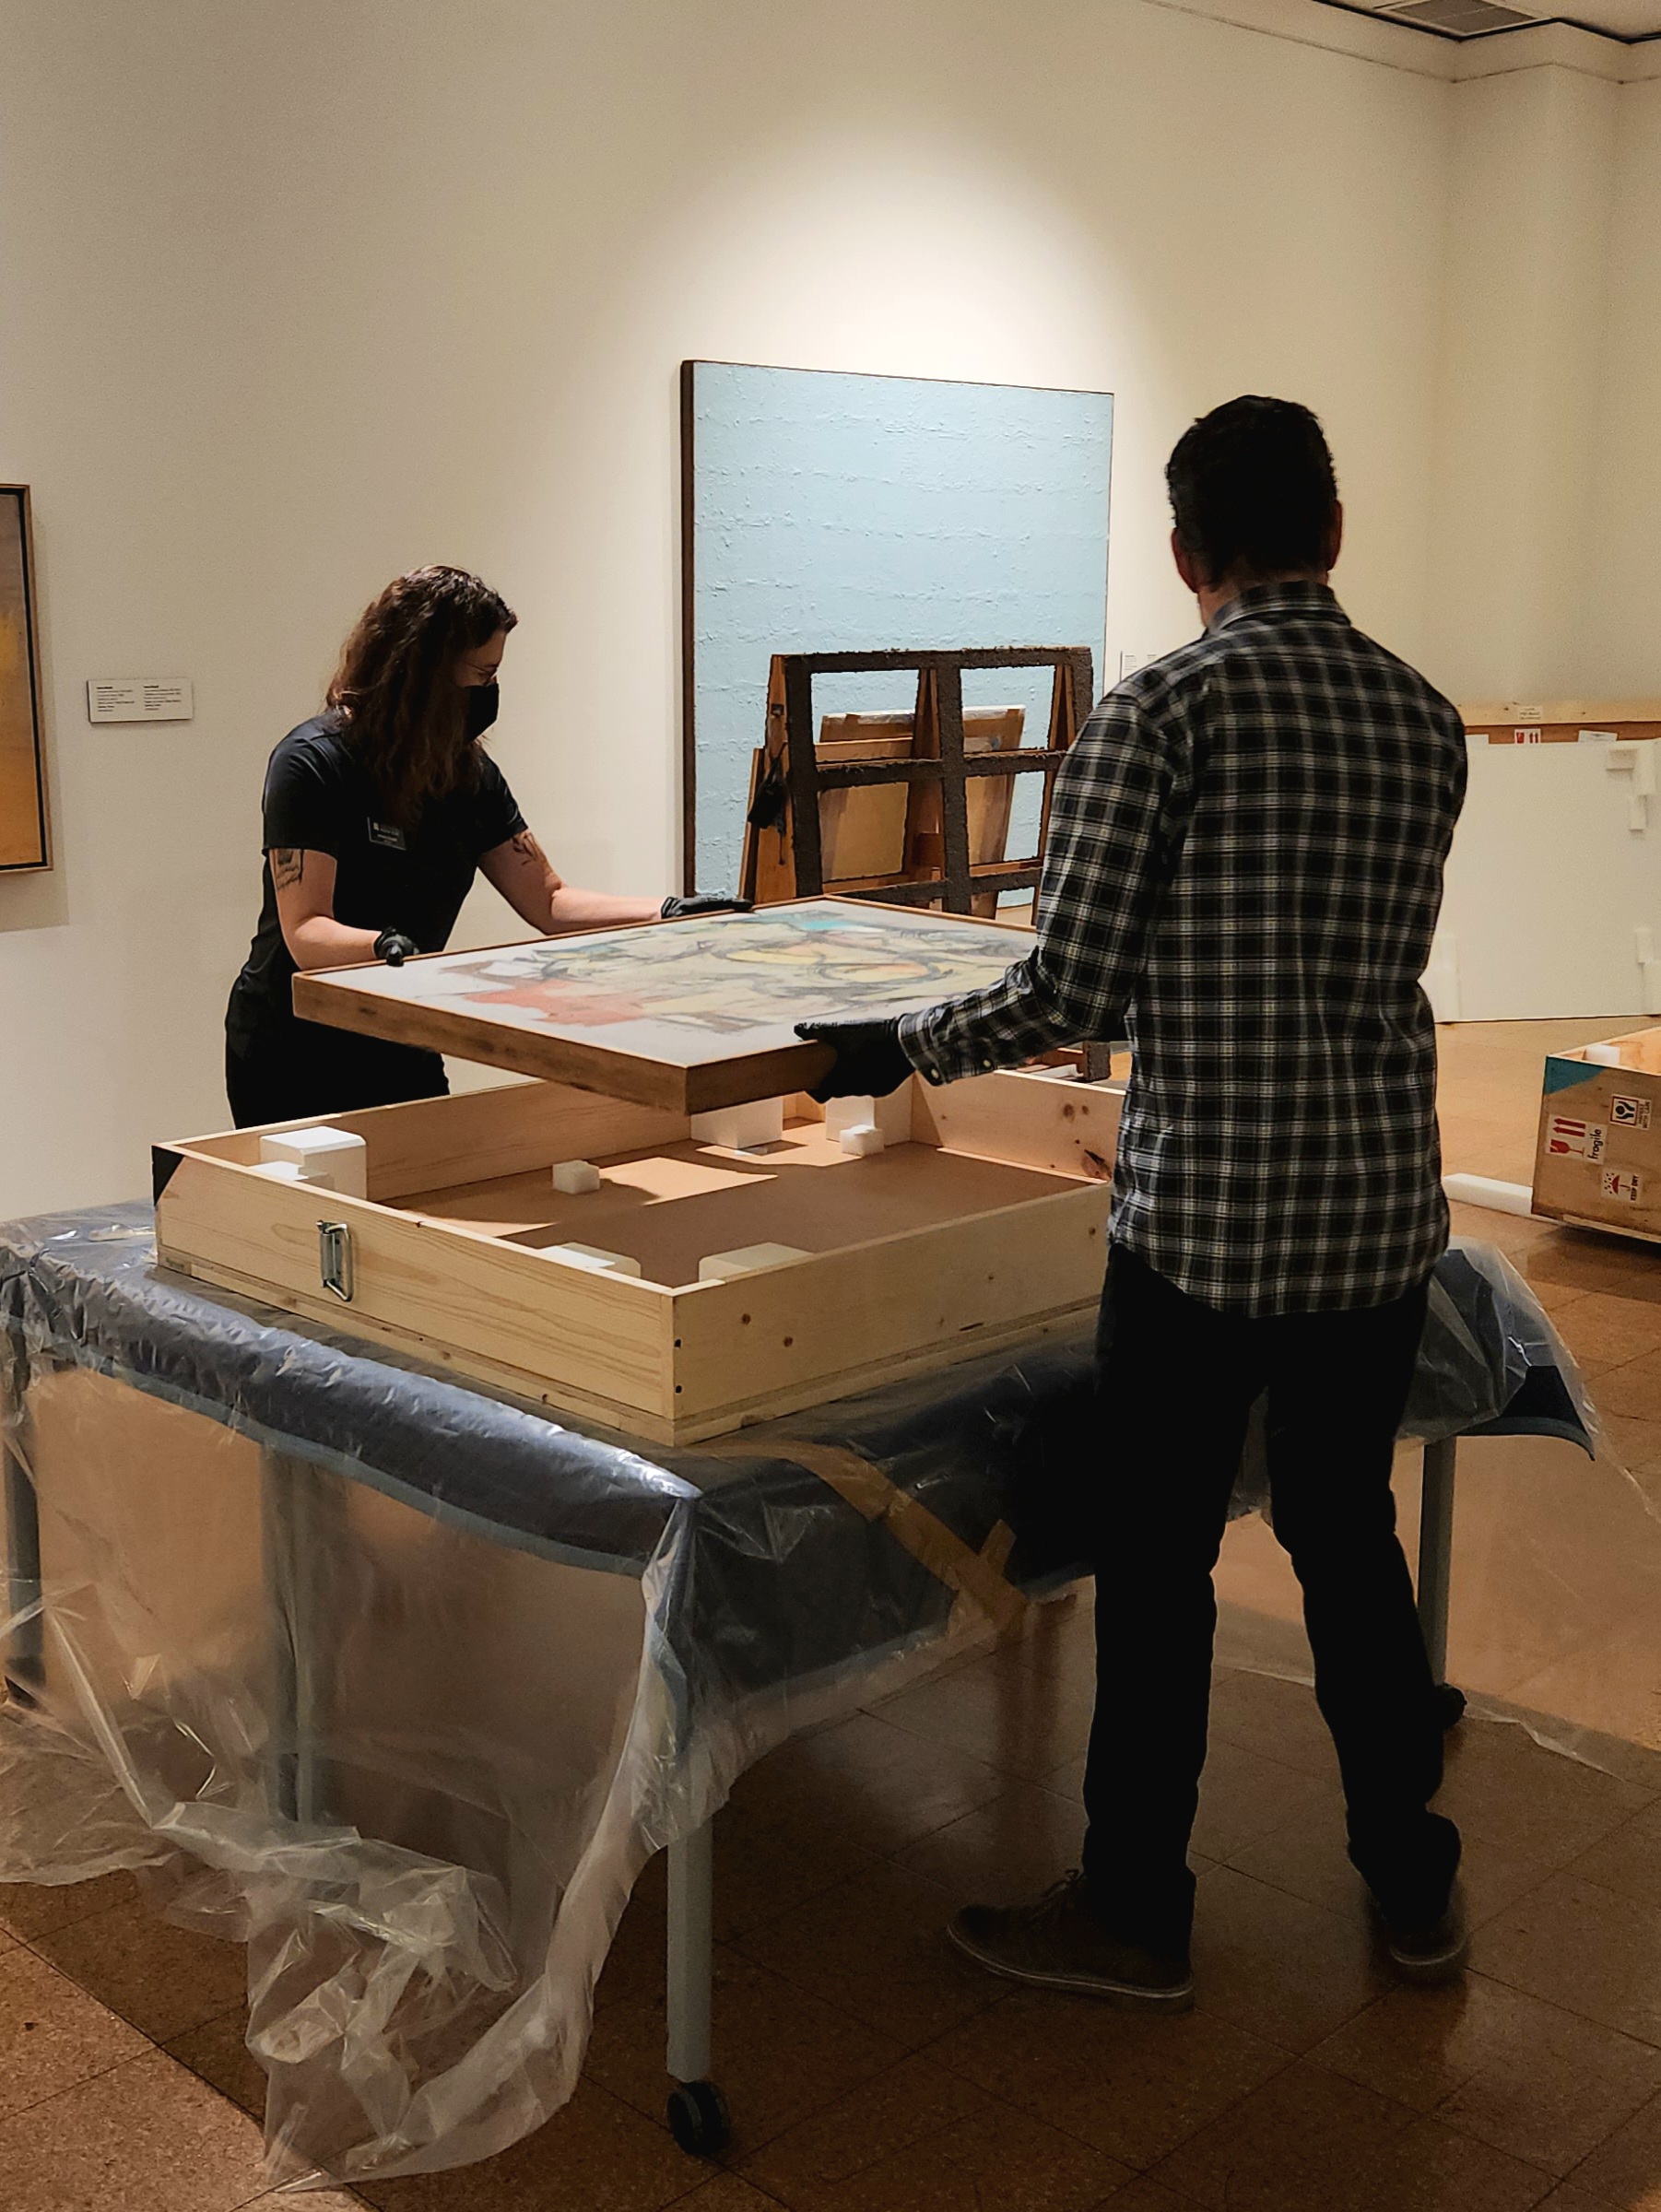 A painting stolen from the University of Arizona Museum of Art 37 years ago has been brought back home due in large part by the careful and meticulous planning by special agents with Homeland Security Investigations (HSI) in coordination with university police.